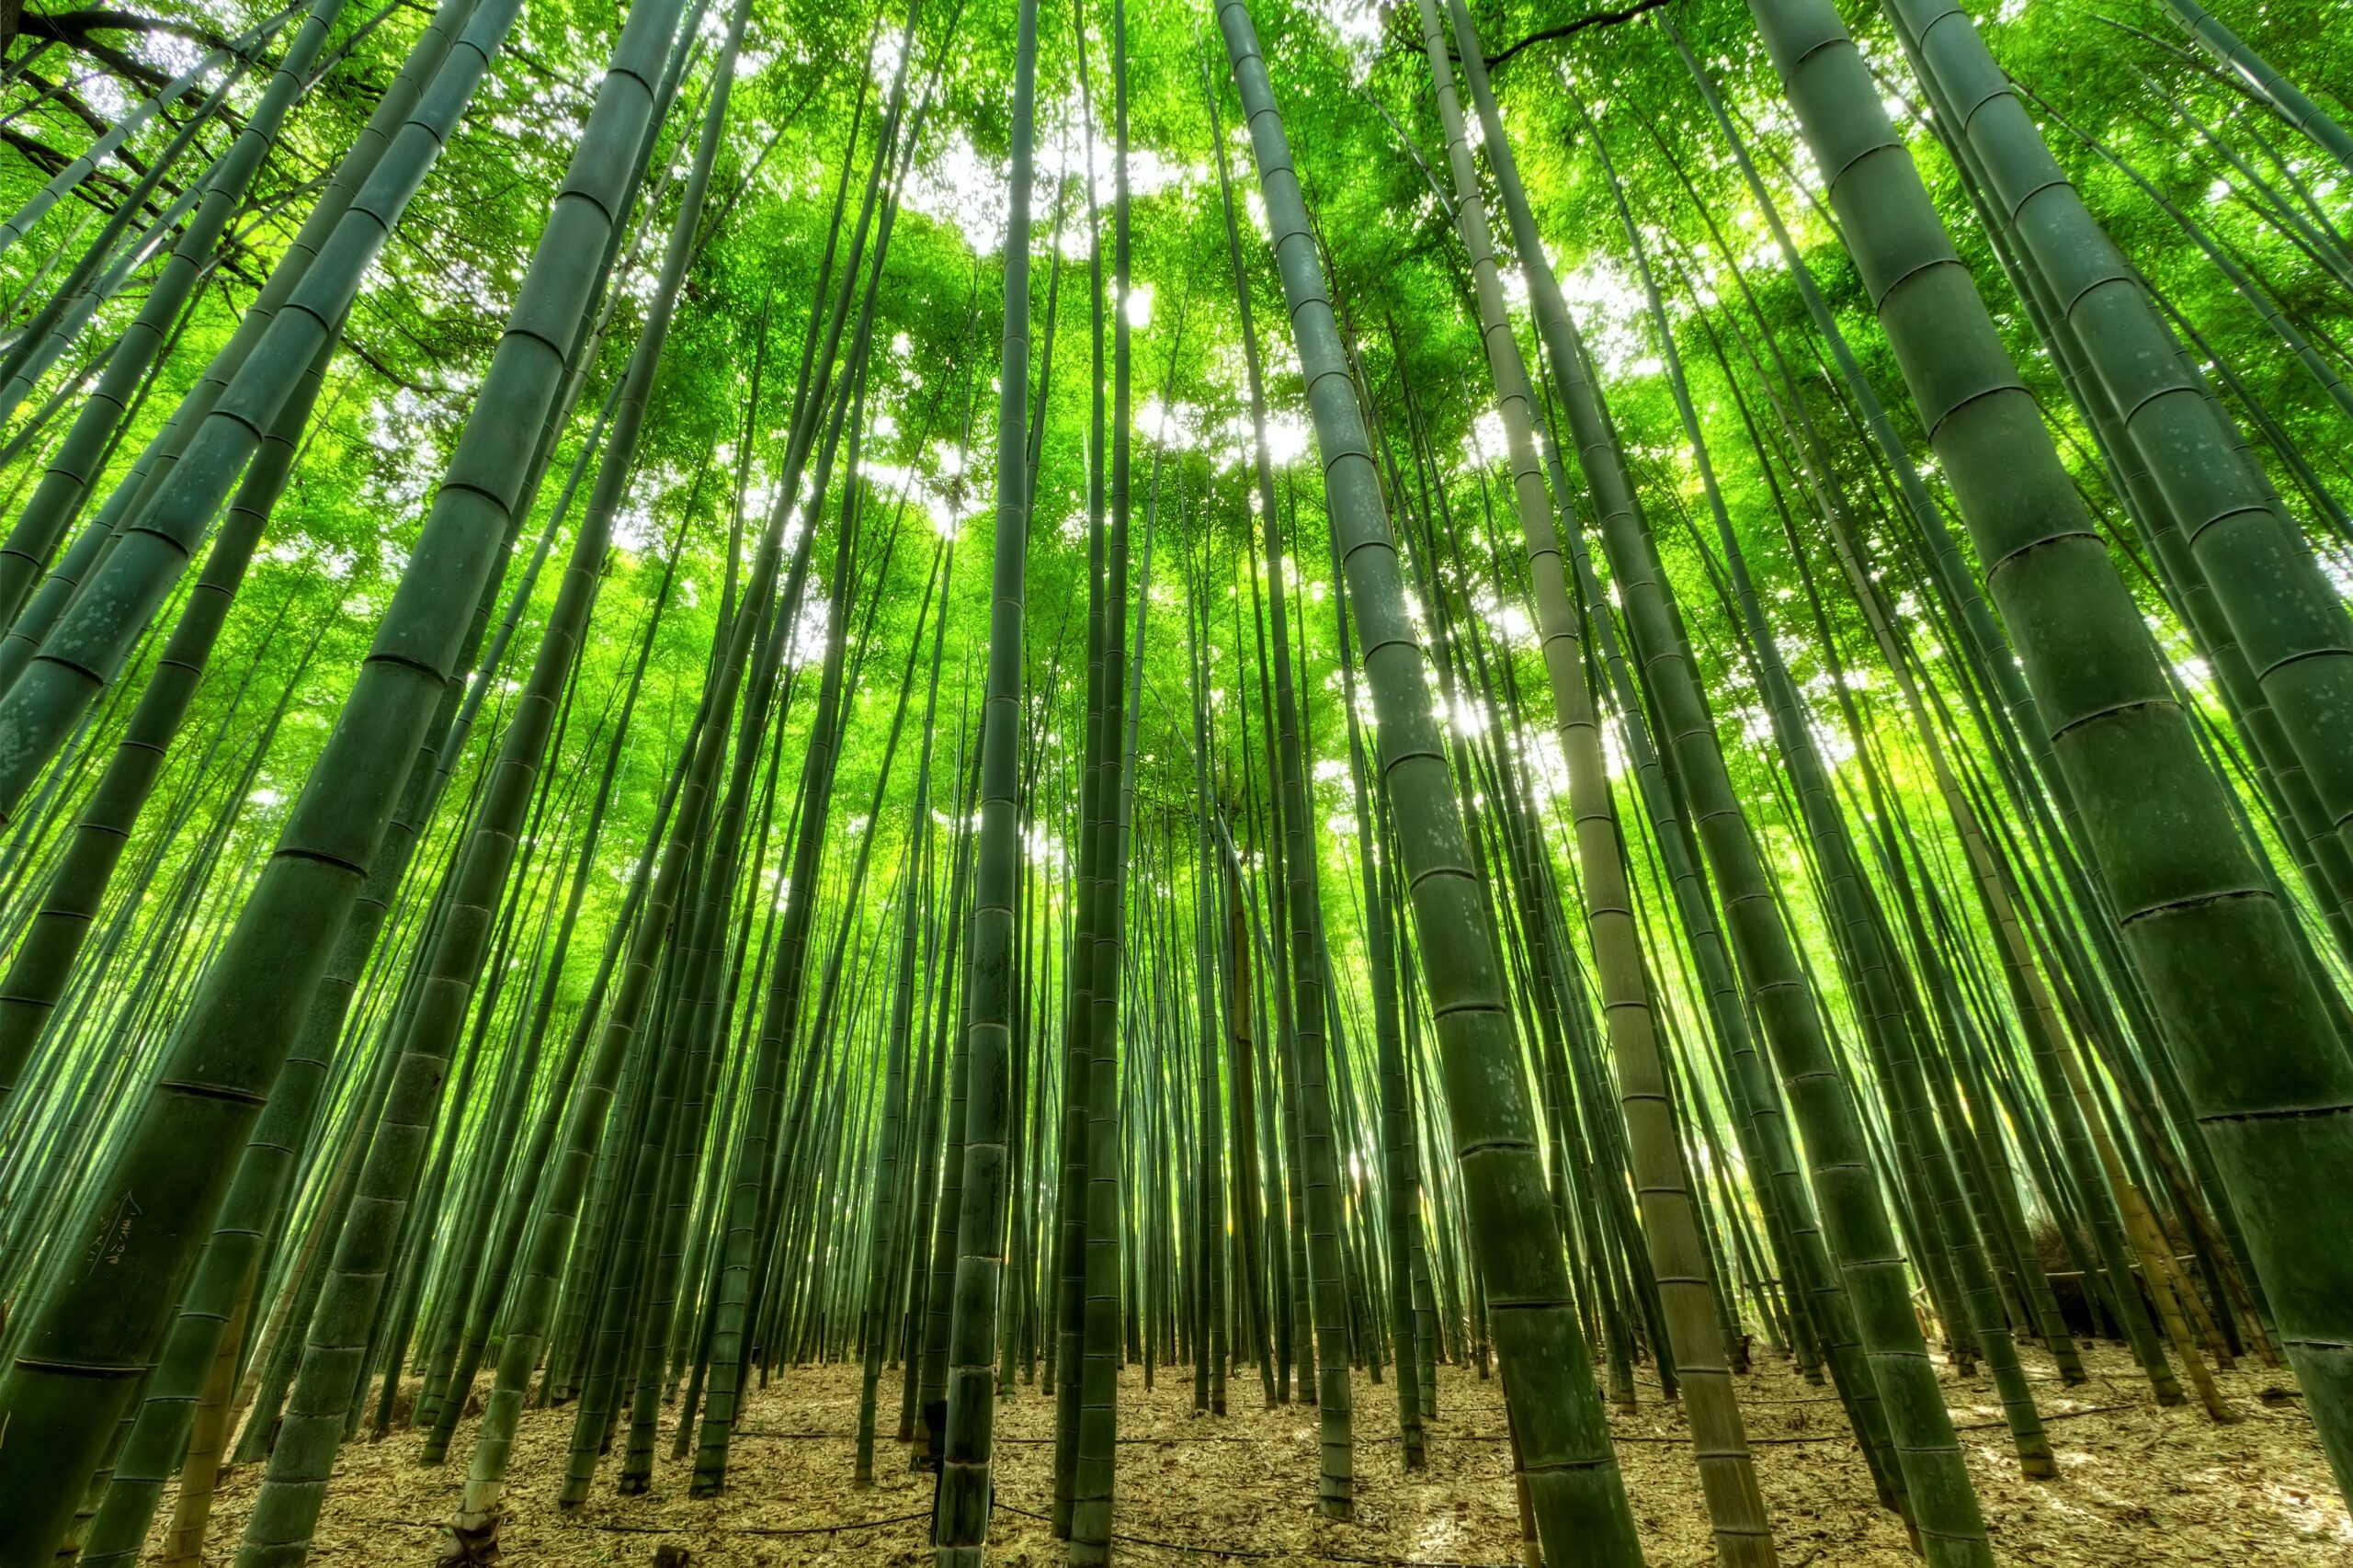 An image of bamboo trees